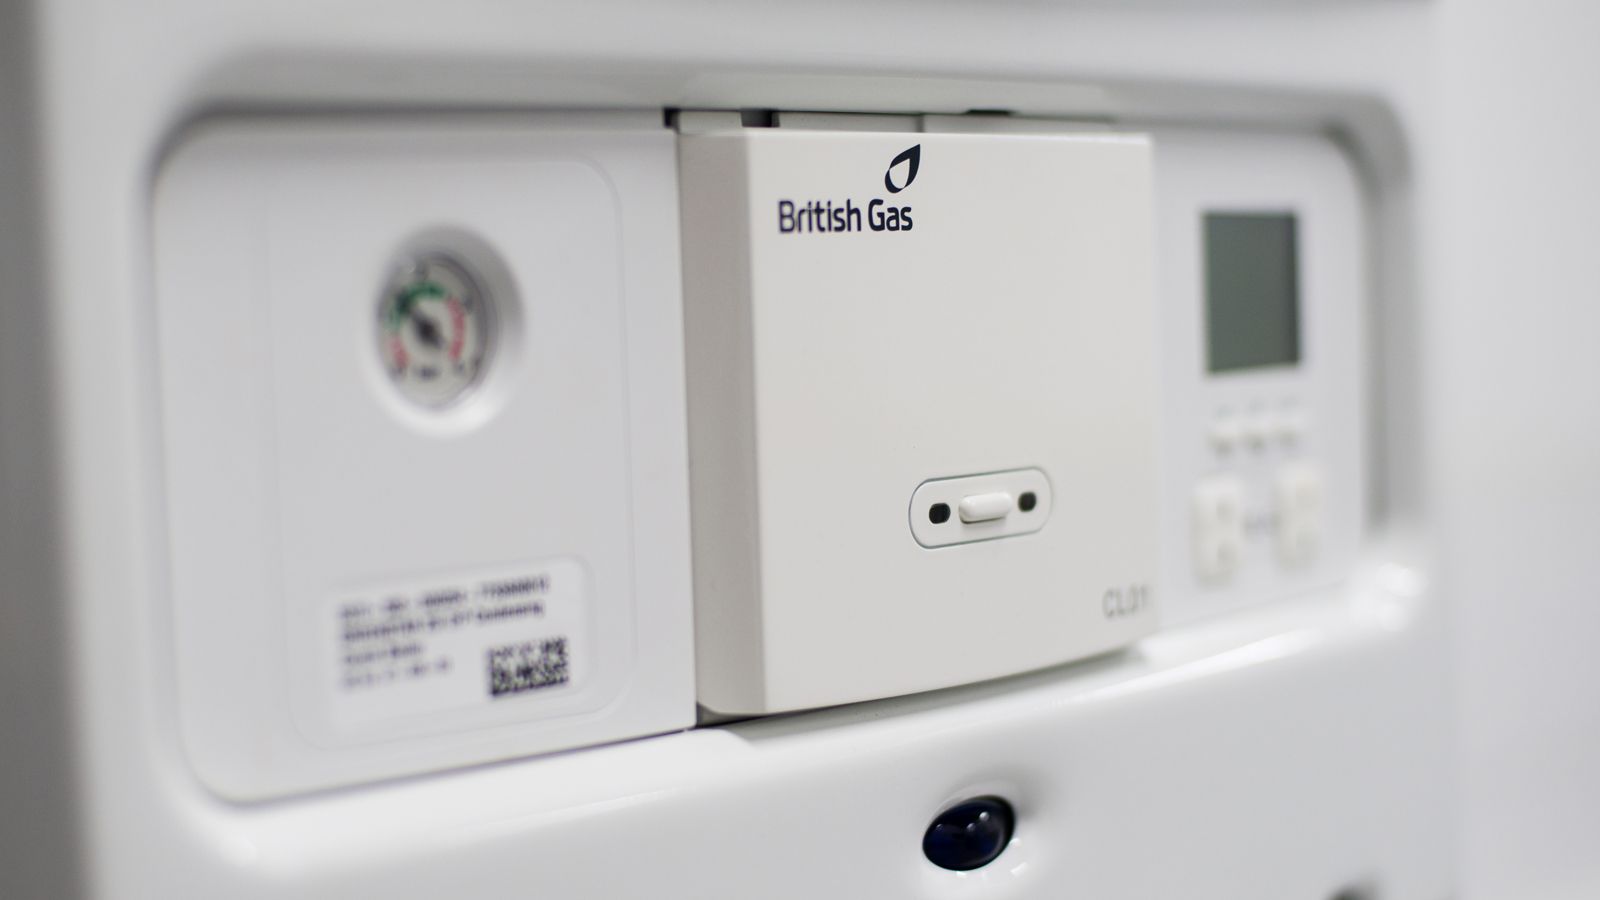 british gas will make your boiler self diagnose faults with boiler iq image 1